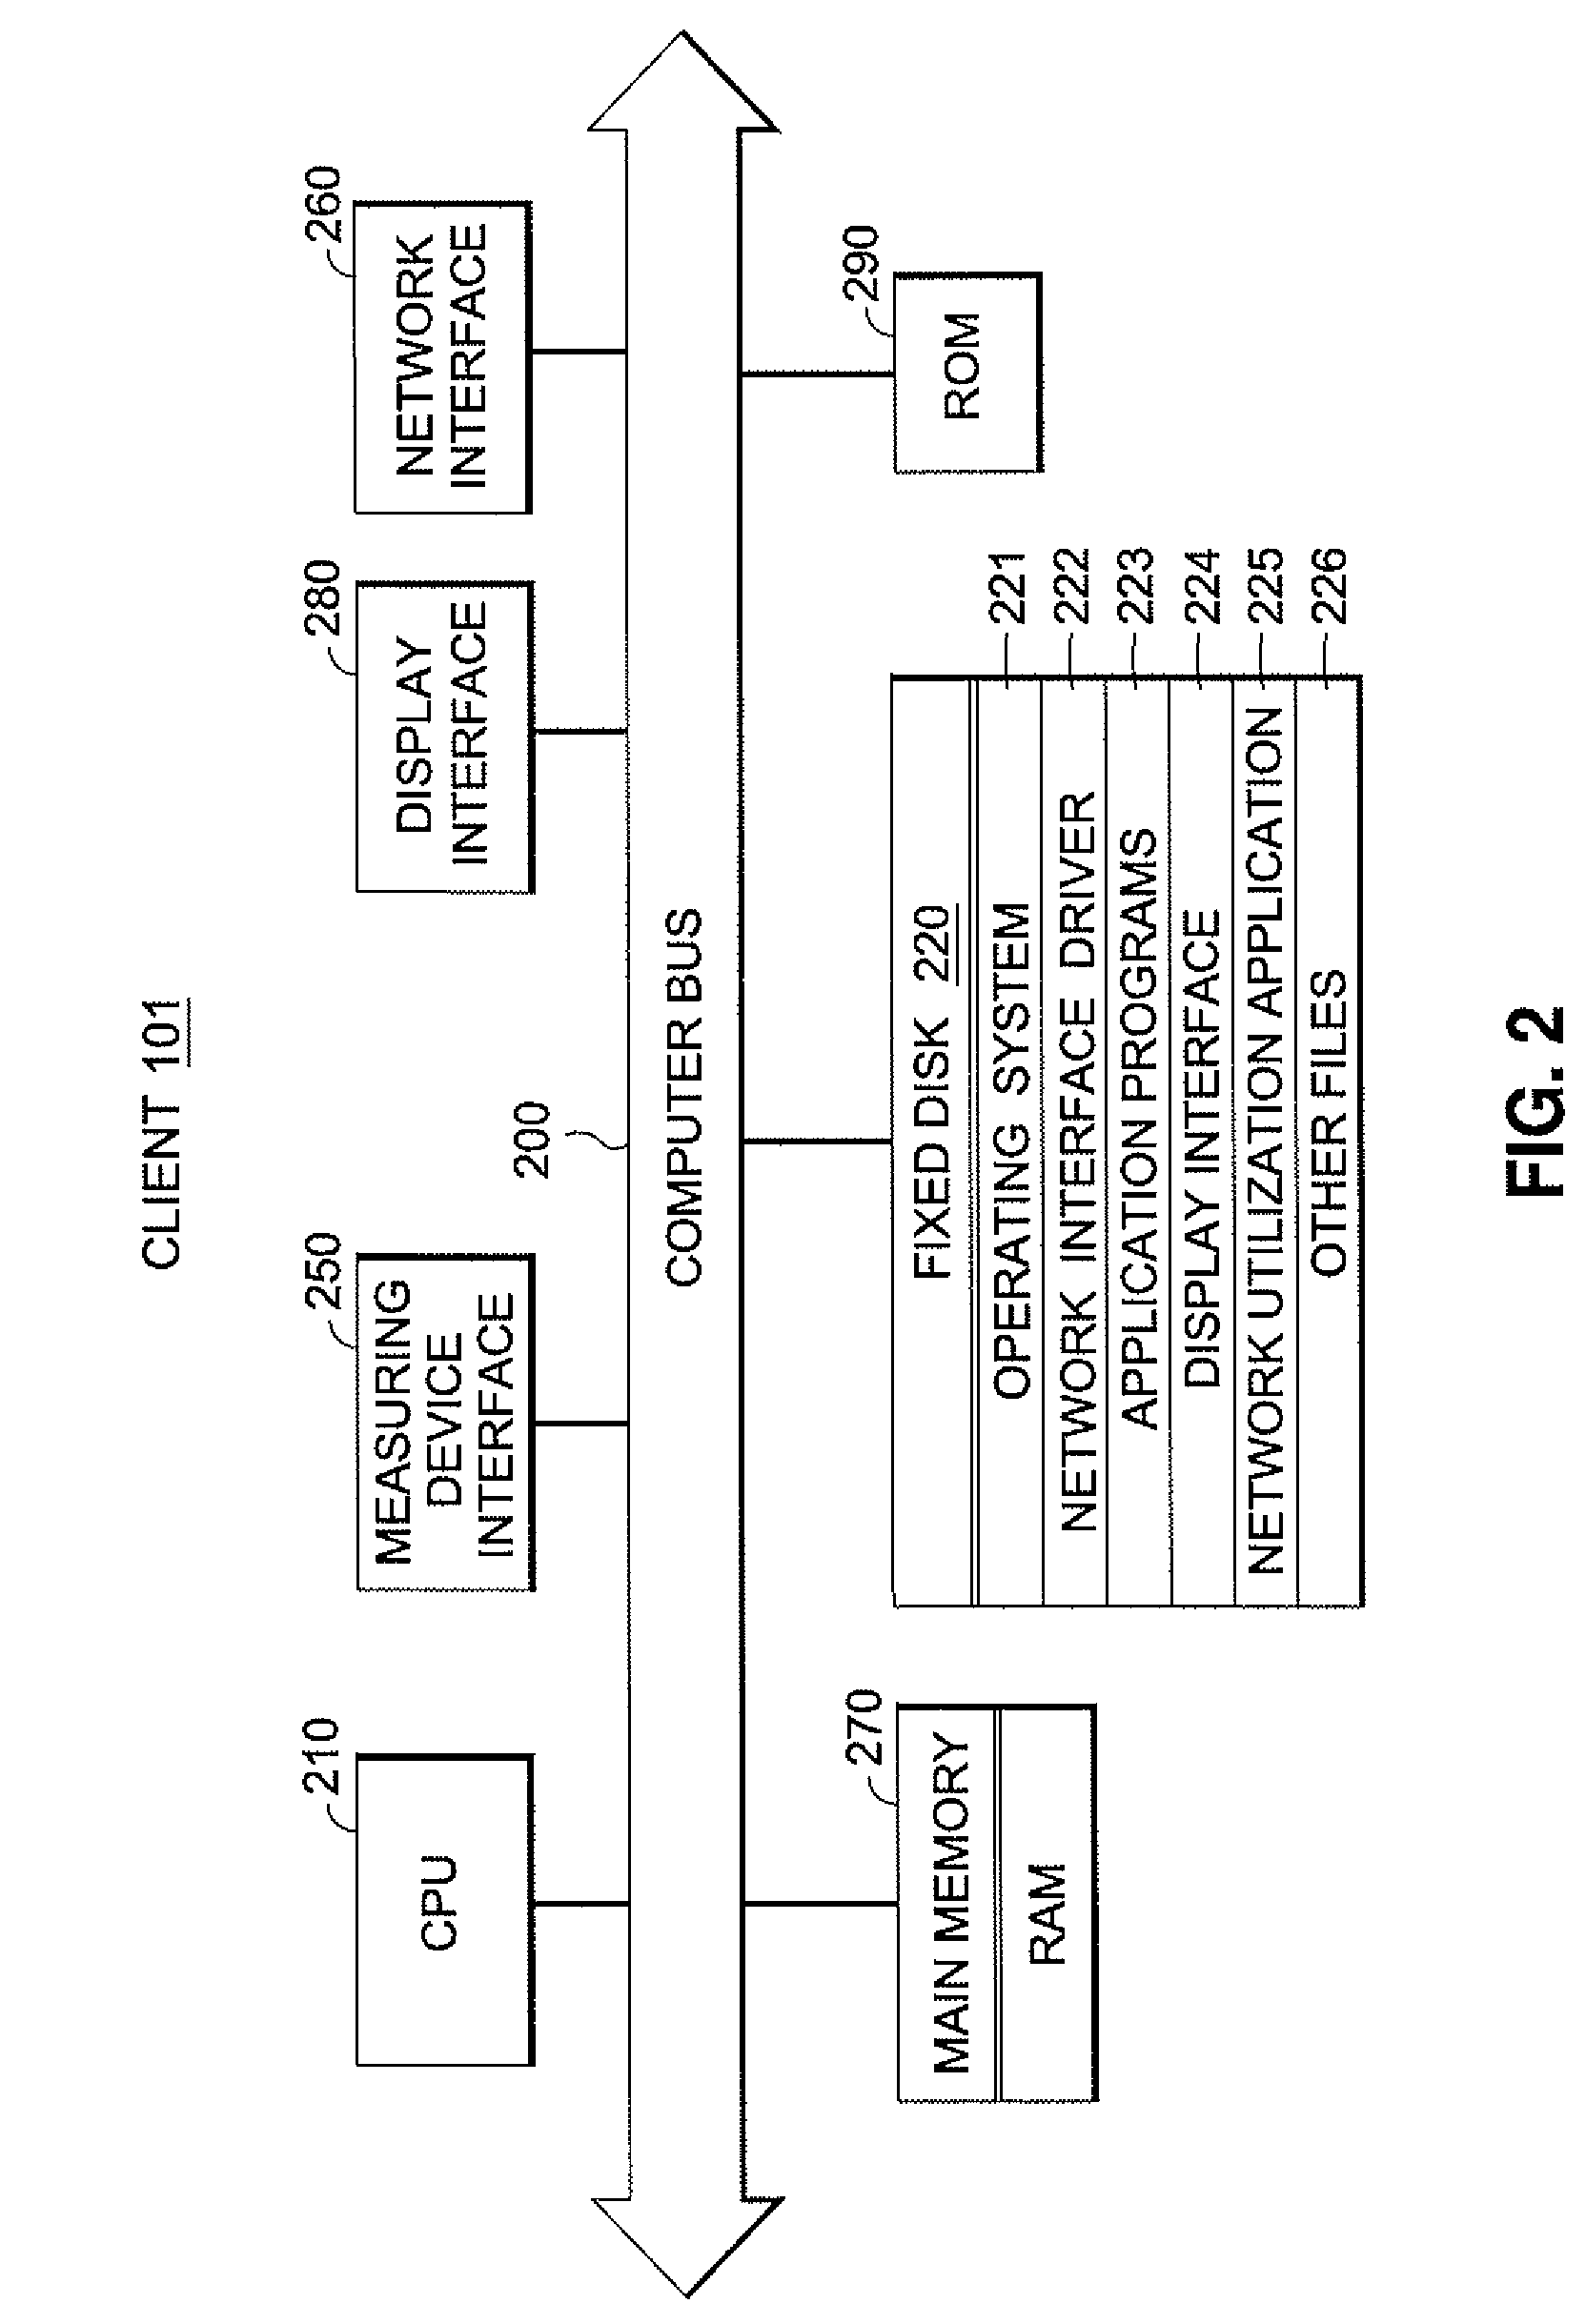 Network streaming of a video media from a media server to a media client